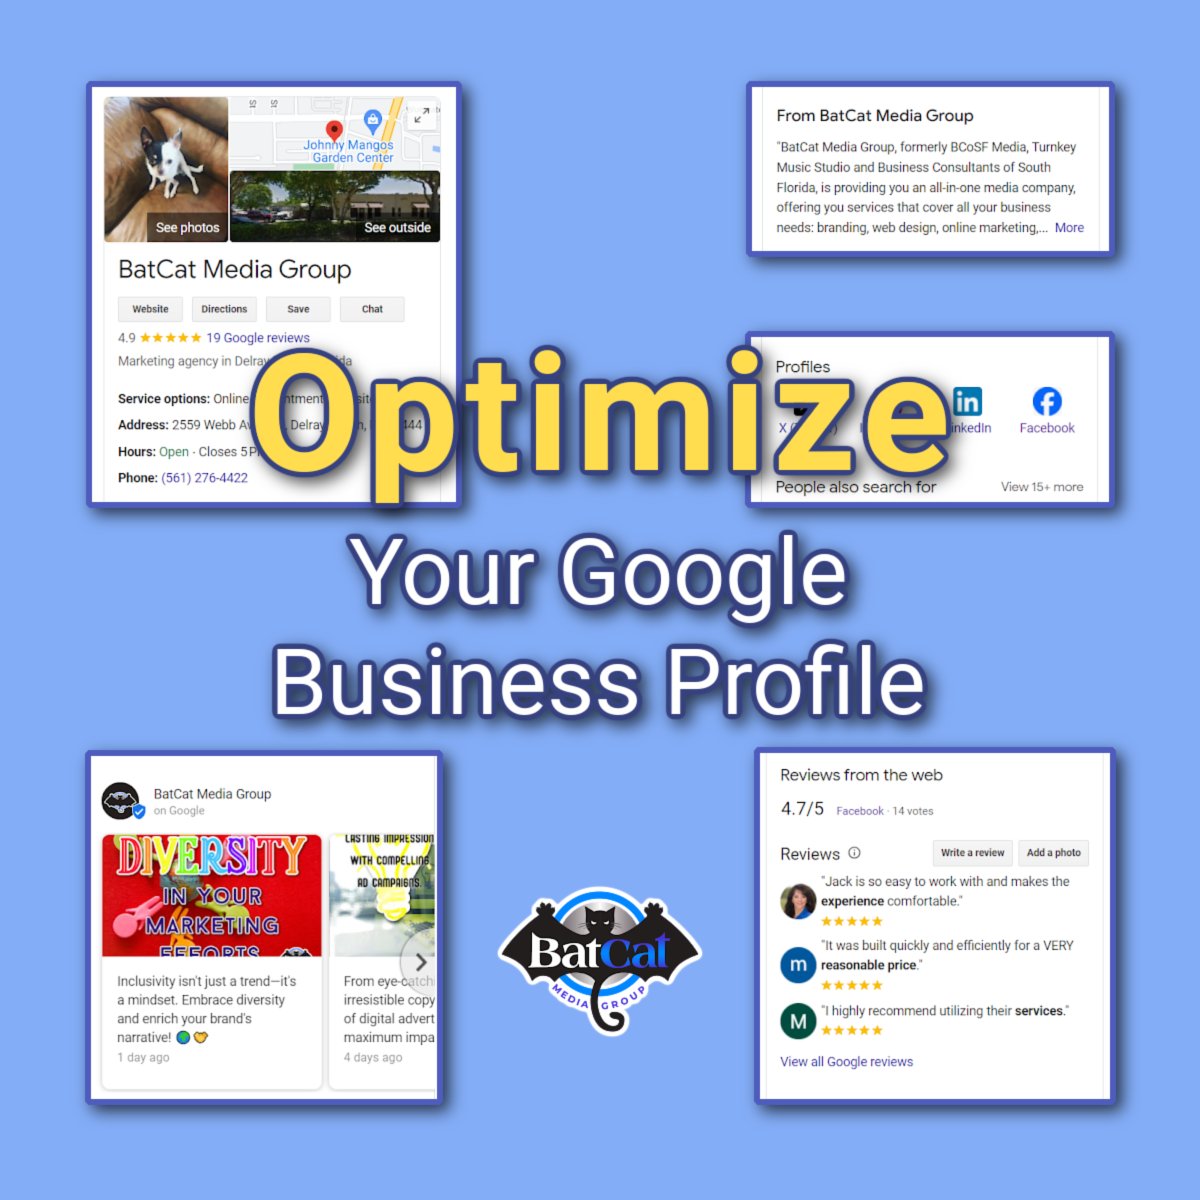 Is your Google Business Profile optimized for local searches? 📍 Make sure your business information is complete and up-to-date to improve your visibility online!  💼 #BatCatMediaGroup #LocalSEO